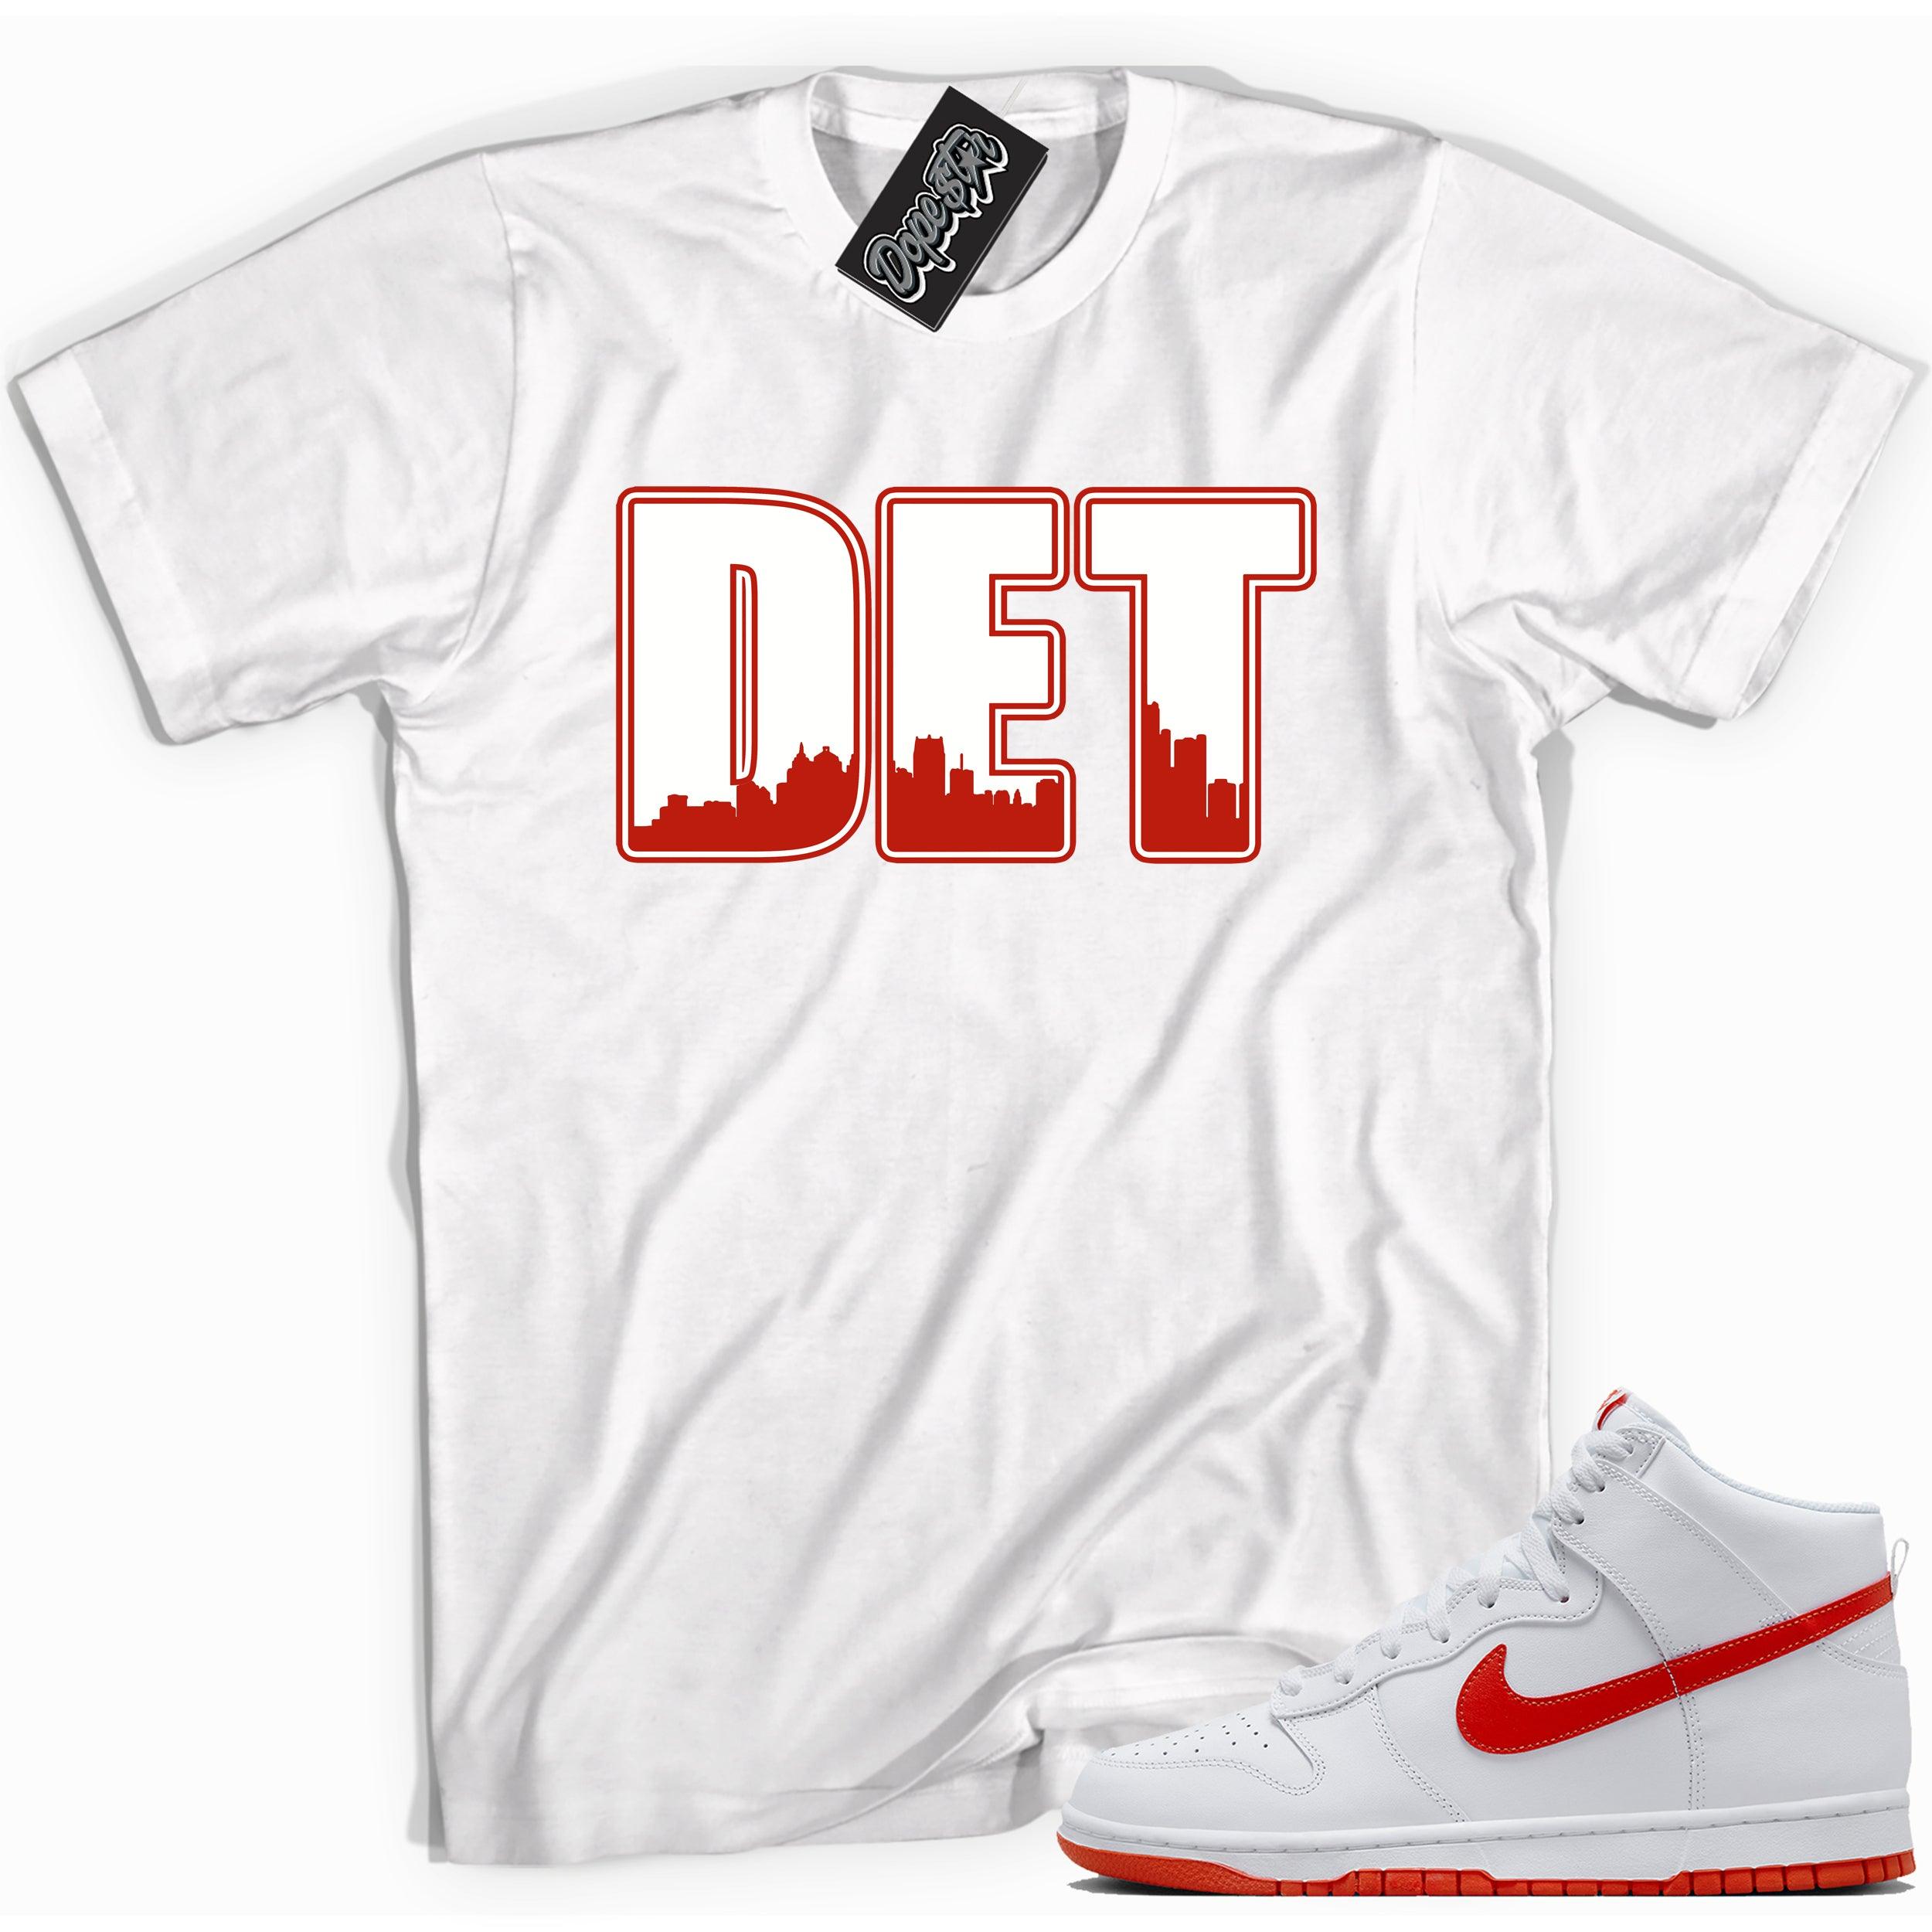 Cool white graphic tee with 'Detroit' print, that perfectly matches Nike Dunk High White Picante Red sneakers.